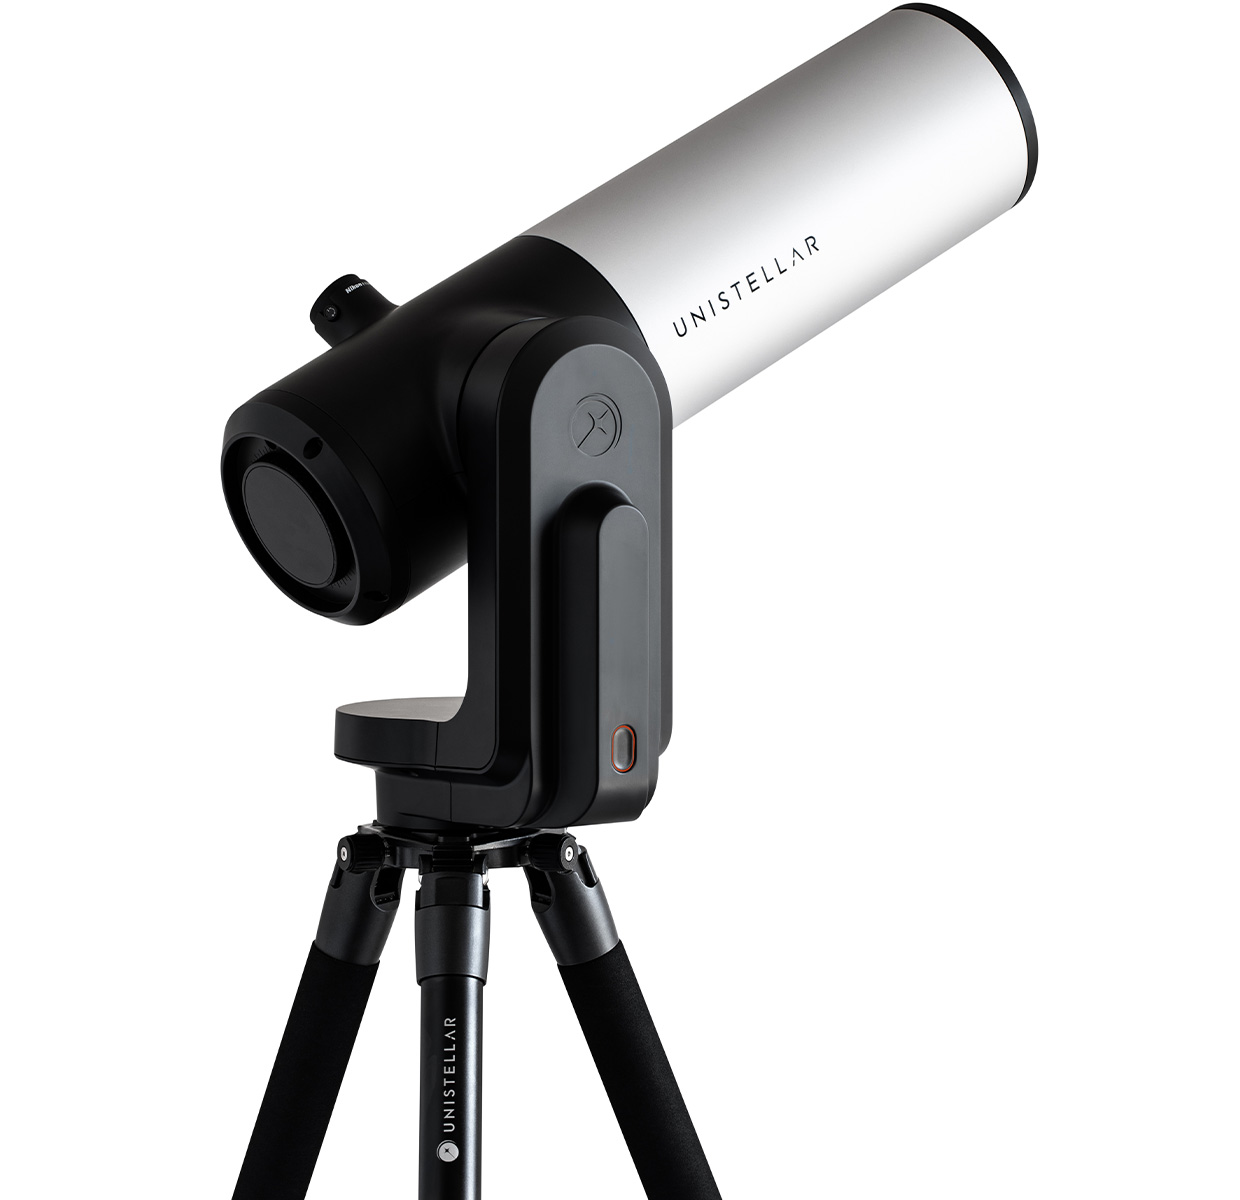 Groene bonen toonhoogte Gewaad The digital astronomical telescope eVscope 2, created by combining the  technologies of Nikon and Unistellar | News | Nikon About Us